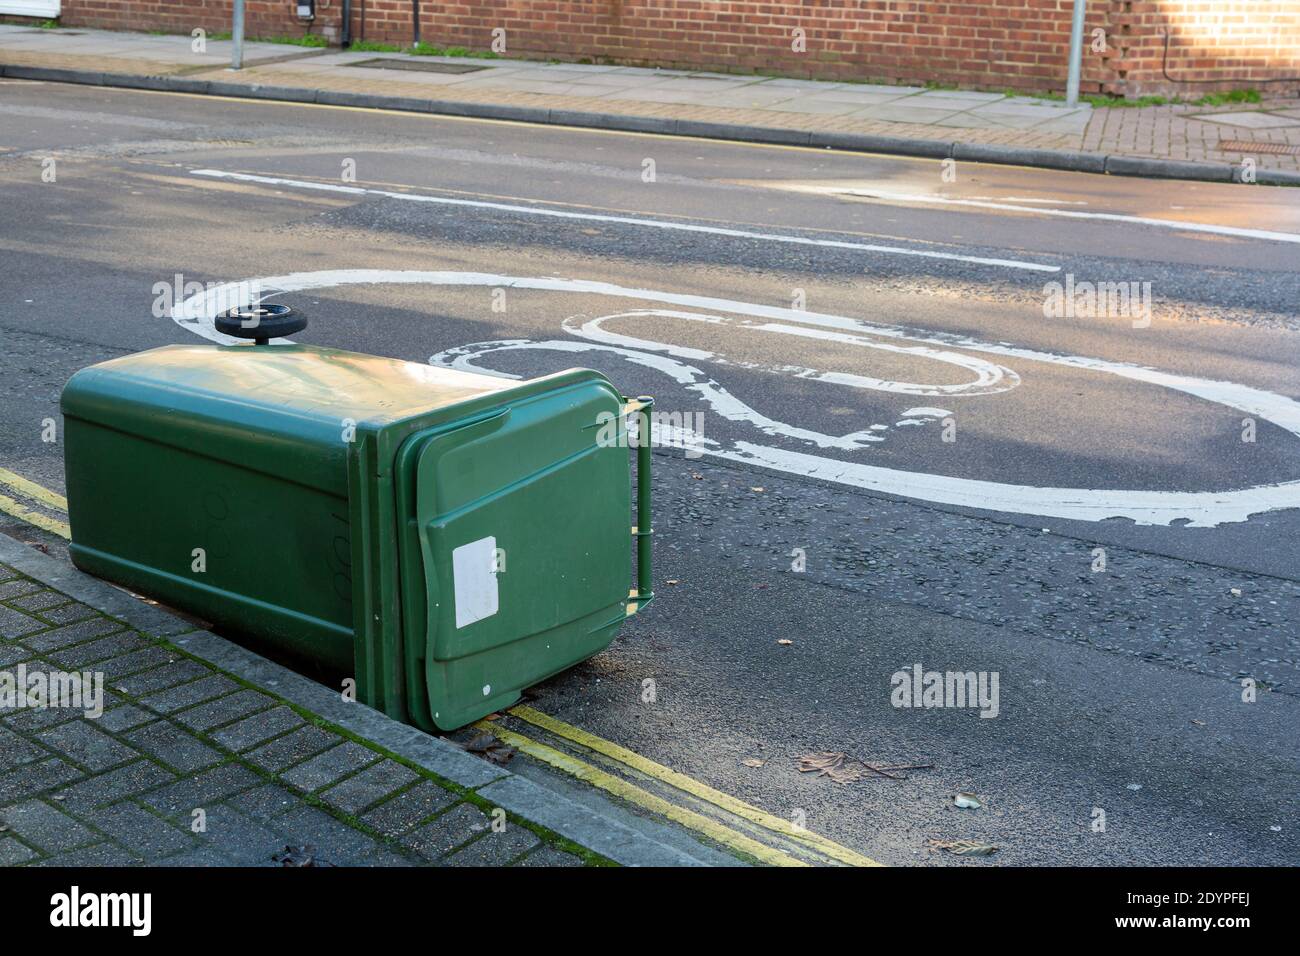 A green recycling wheelie bin blow into the road on a street after high winds Stock Photo